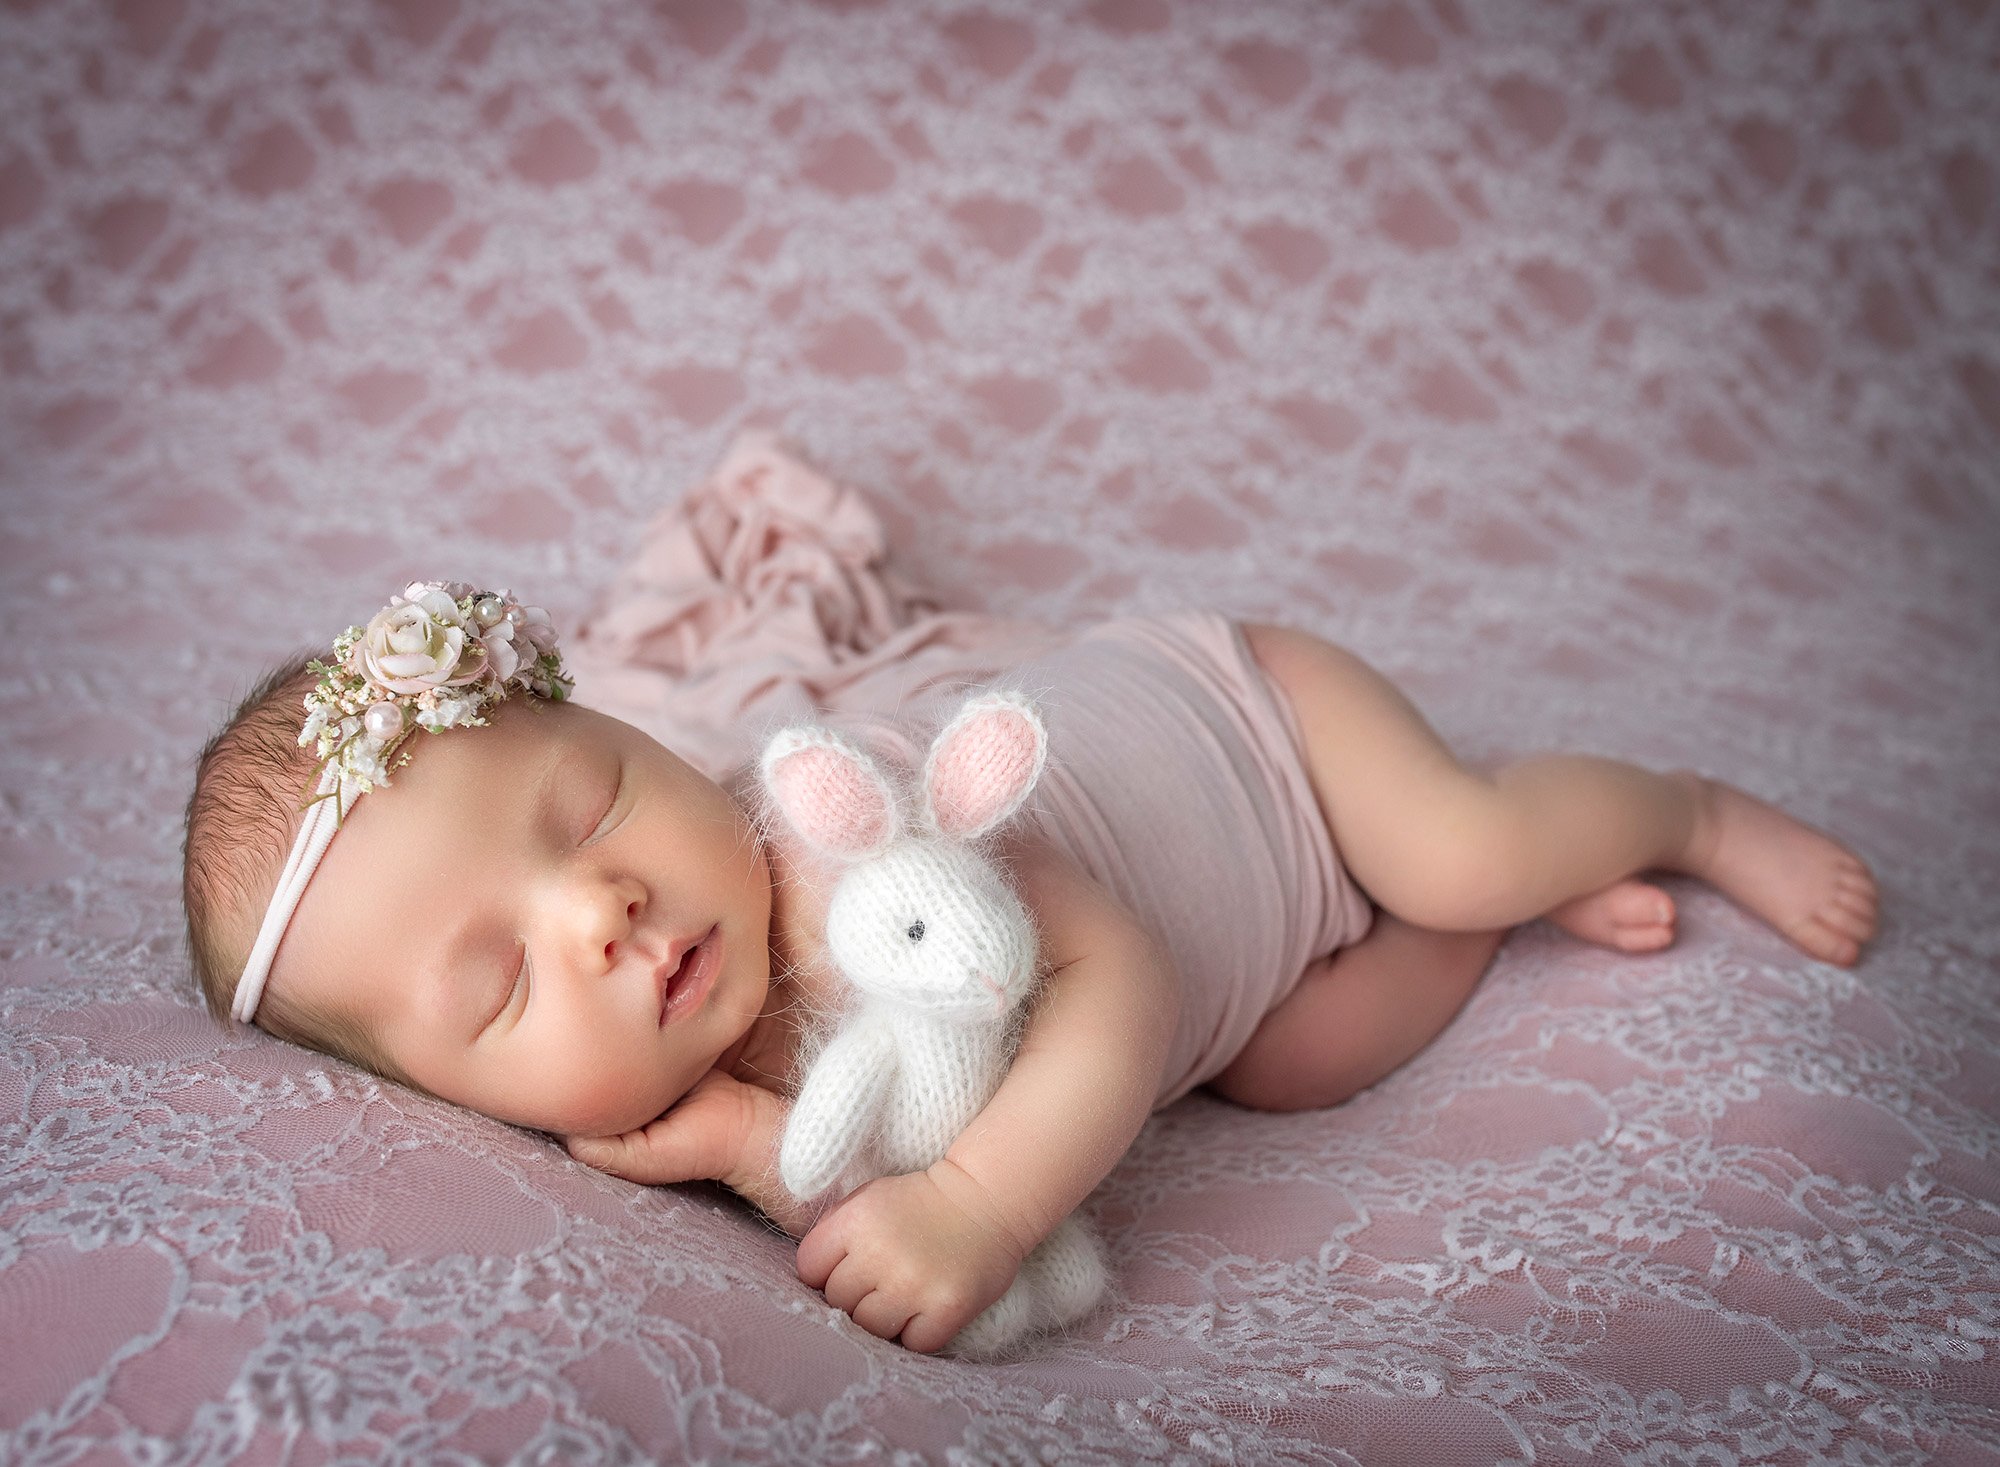 posed newborn photography baby lying on her side holding a knitted bunny